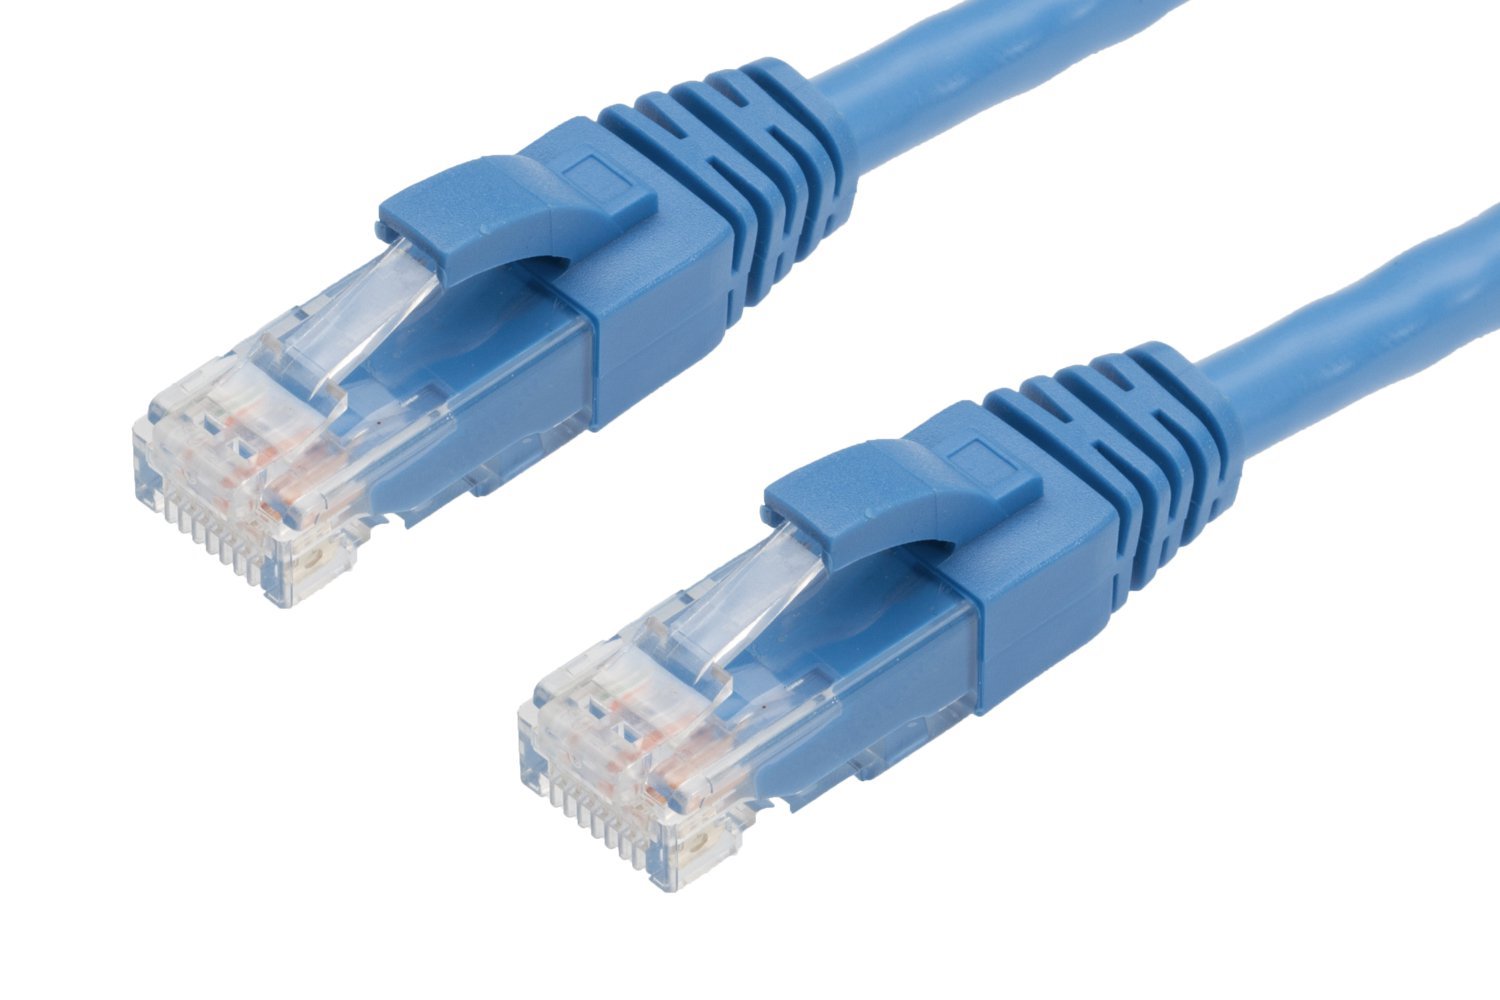 4Cabling 0.5M Cat 6 Ethernet Network Cable: Blue